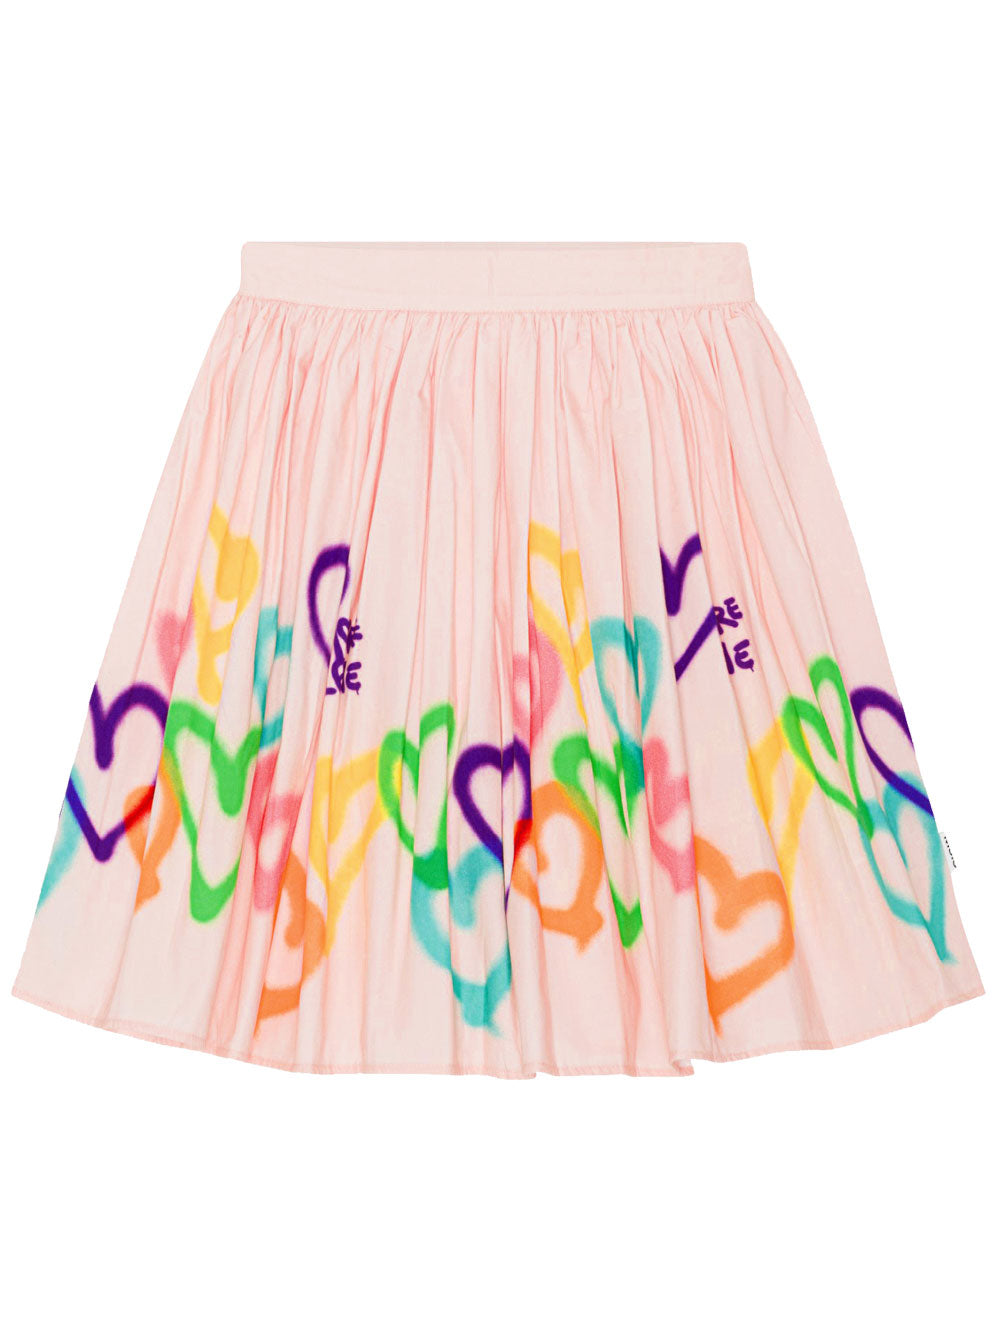 Bonnie Colorful Hearts Skirt